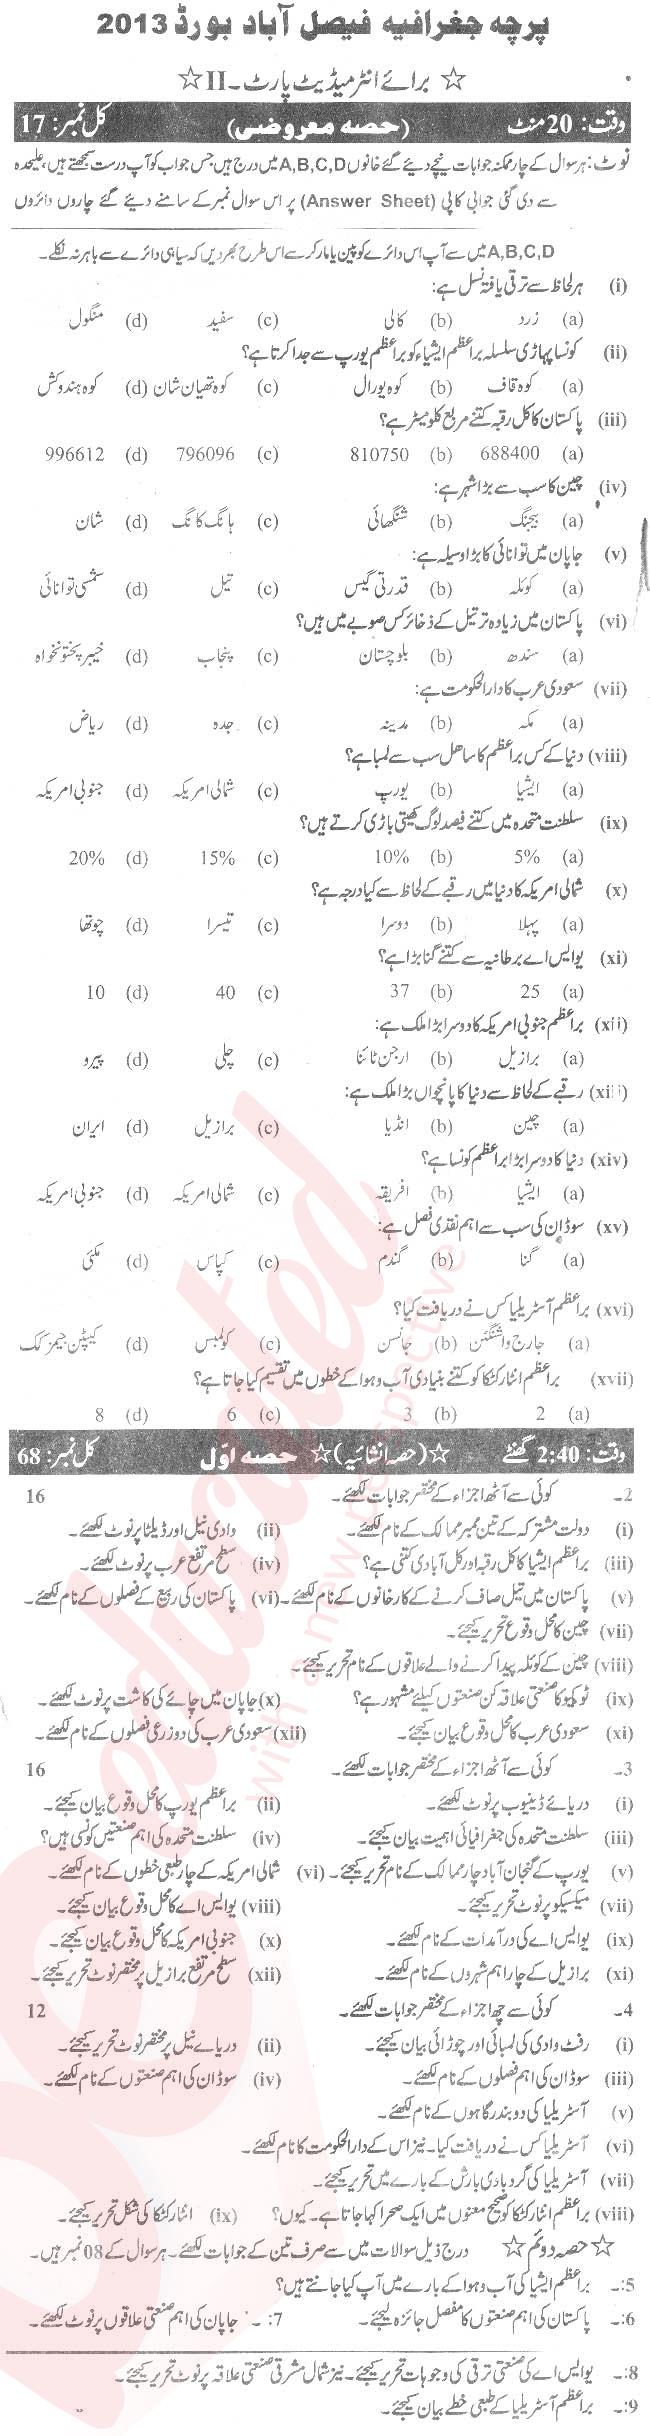 Commercial Geography FA Part 2 Past Paper Group 1 BISE Faisalabad 2013